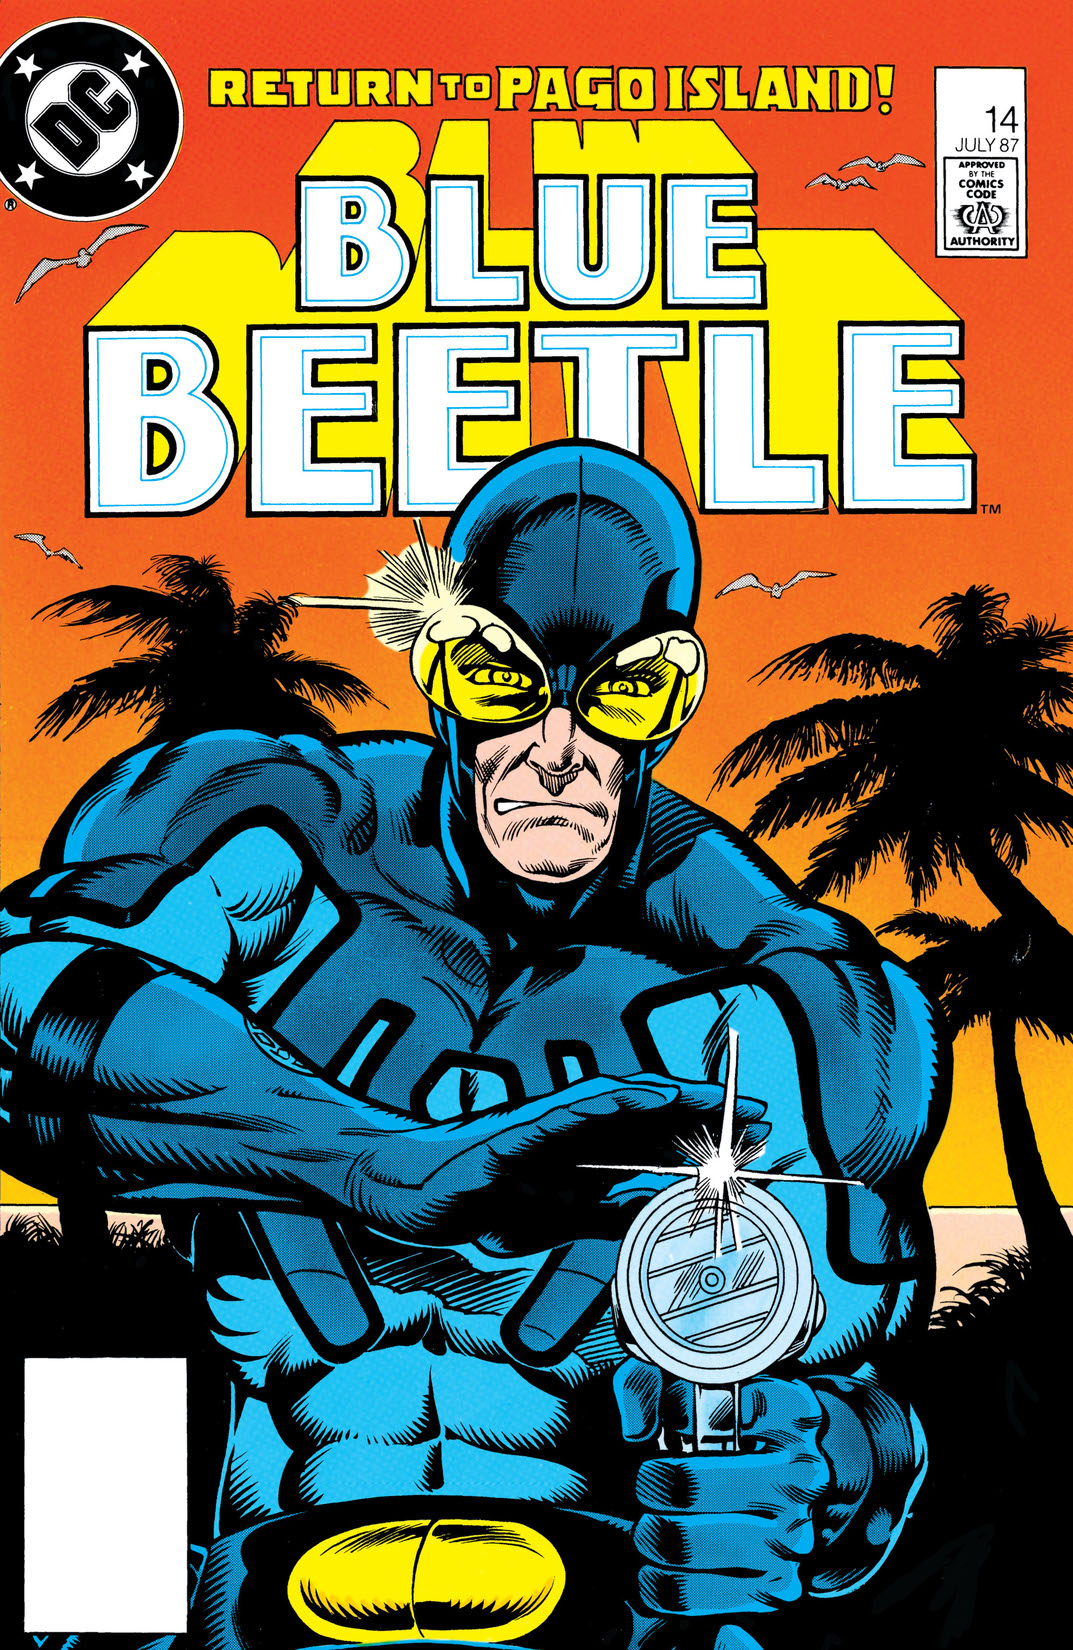 Blue Beetle (1986-) #14 preview images